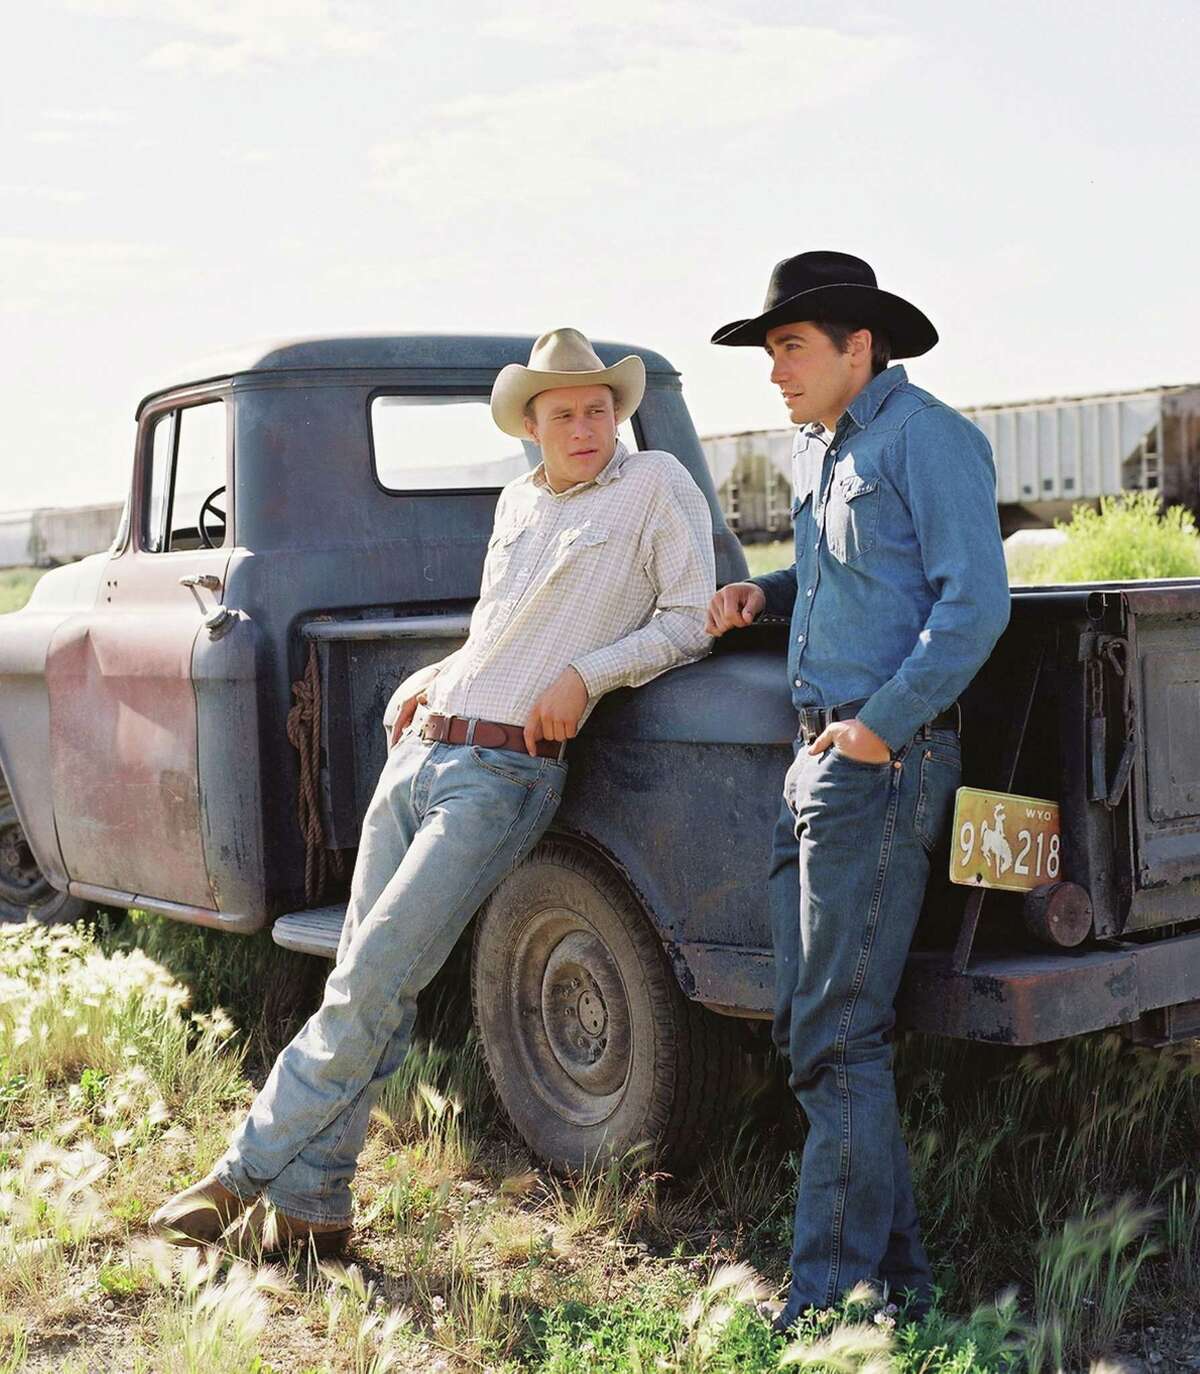 Many movie fans still have not forgiven the Academy of Motion Picture Arts and Sciences for choosing “Crash” over “Brokeback Mountain” as Best Picture of 2005.